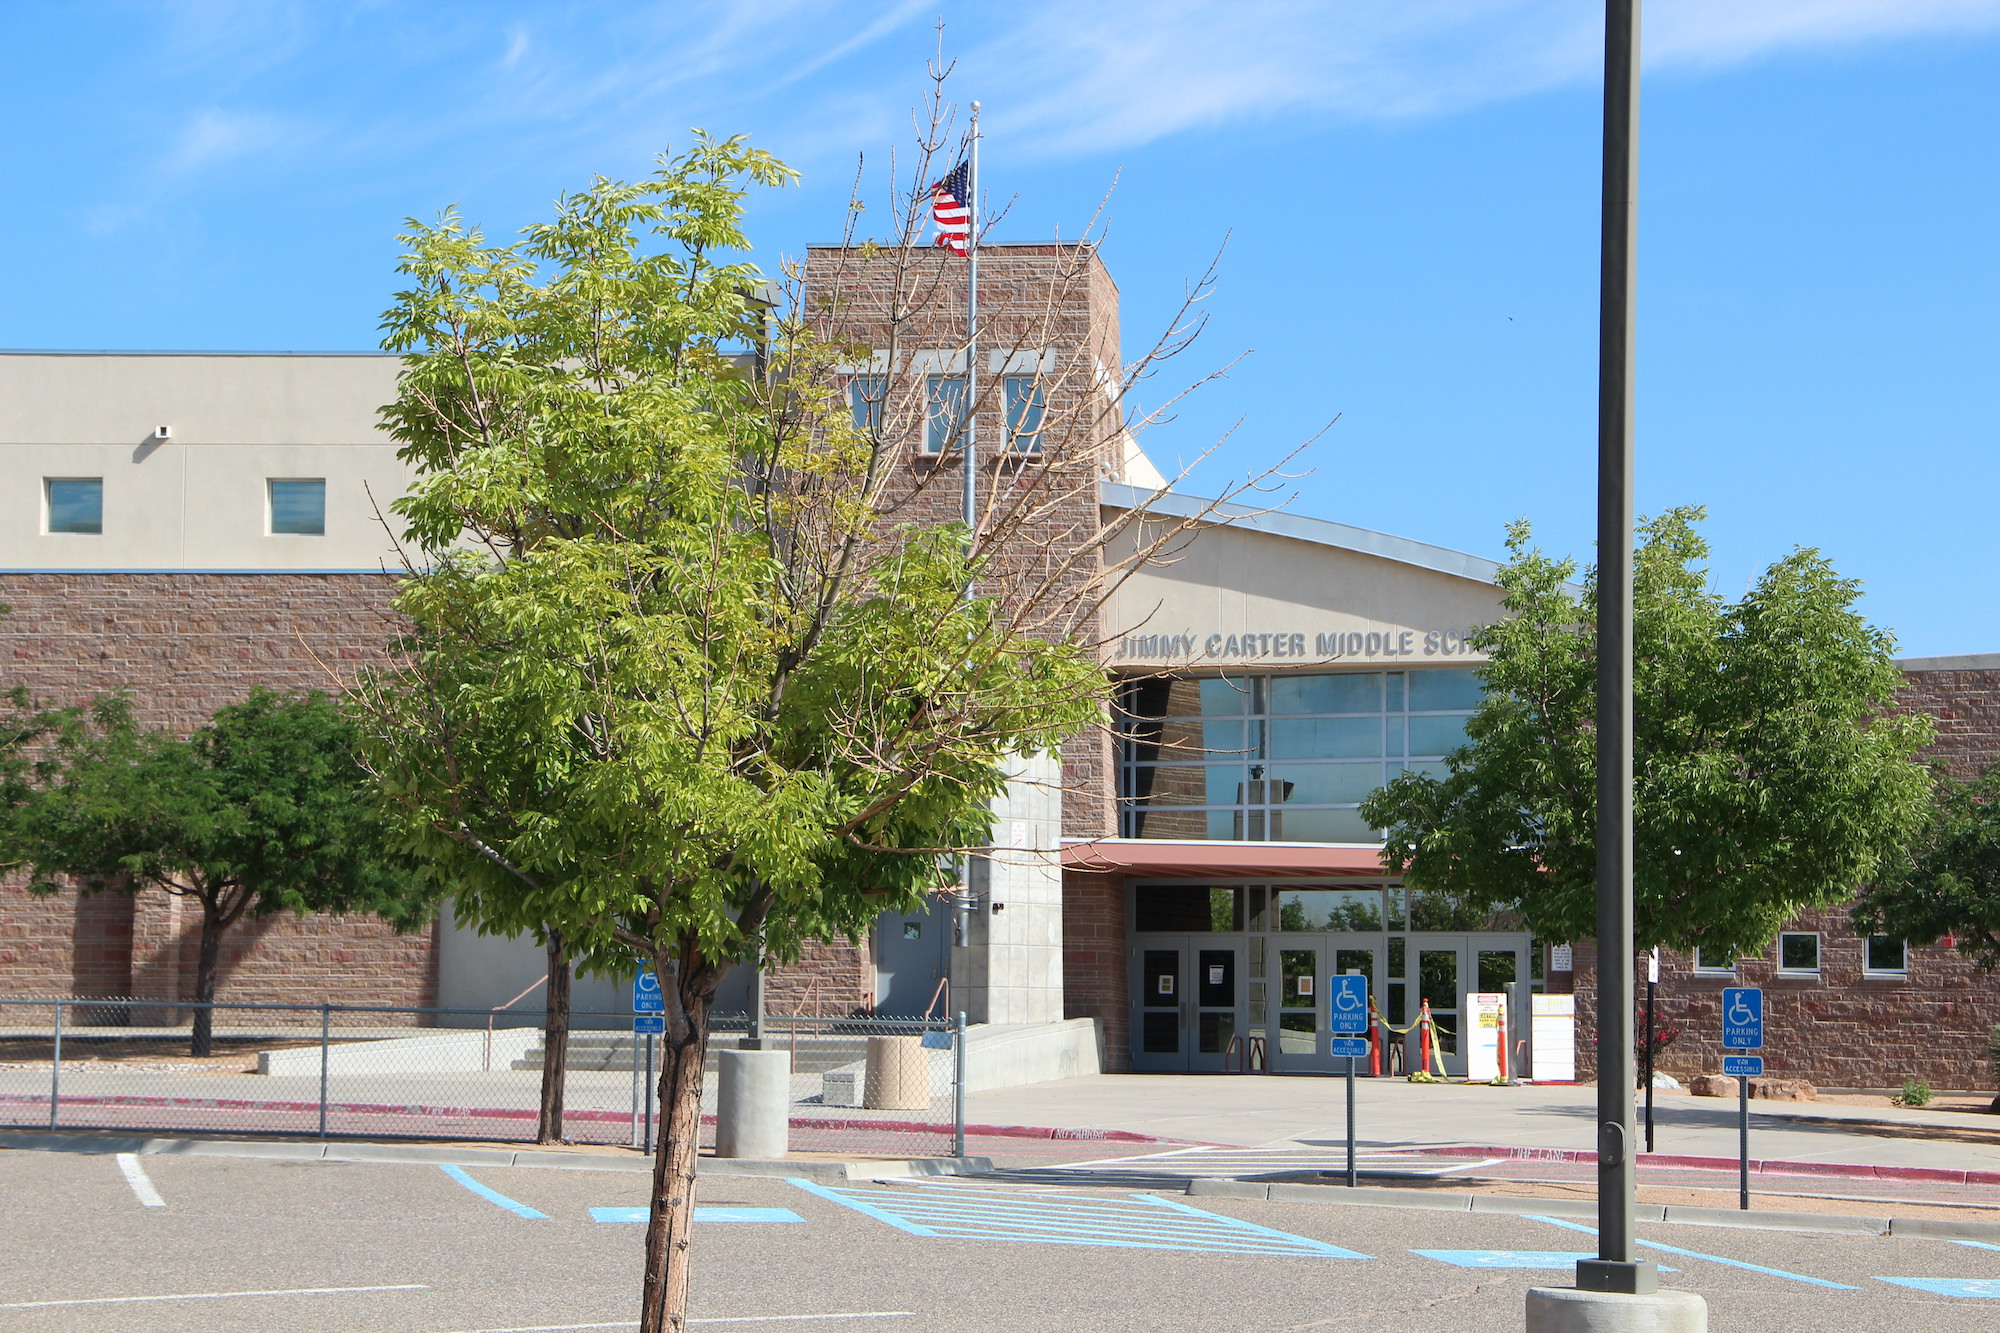 Picture of Jimmy Carter Middle School 8901 Bluewater Rd NW, Albuquerque, NM 87121